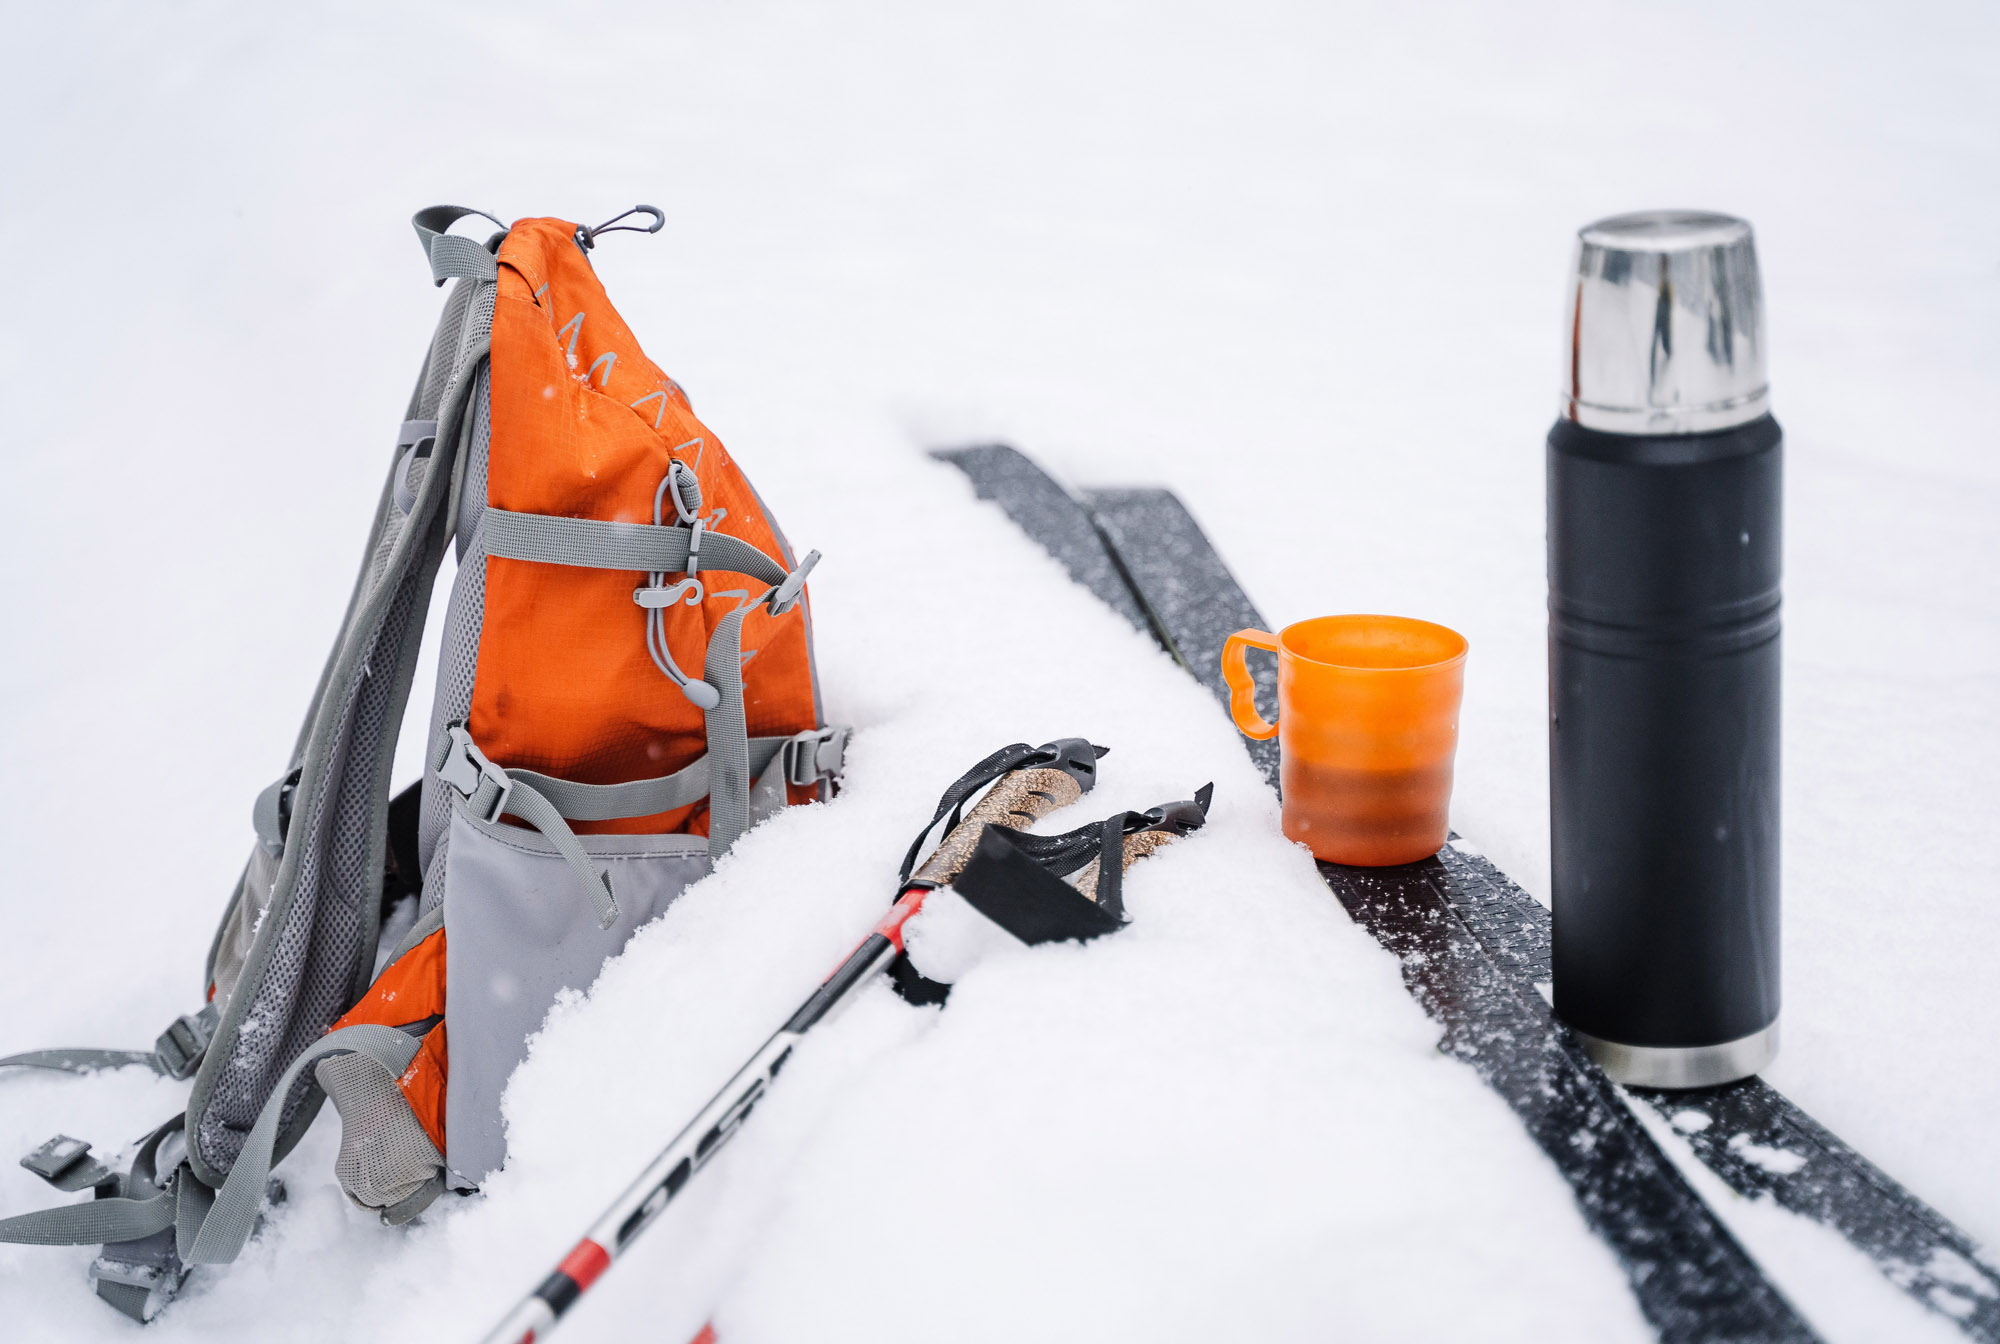 A backpack in snow and an insulated bottle on skis